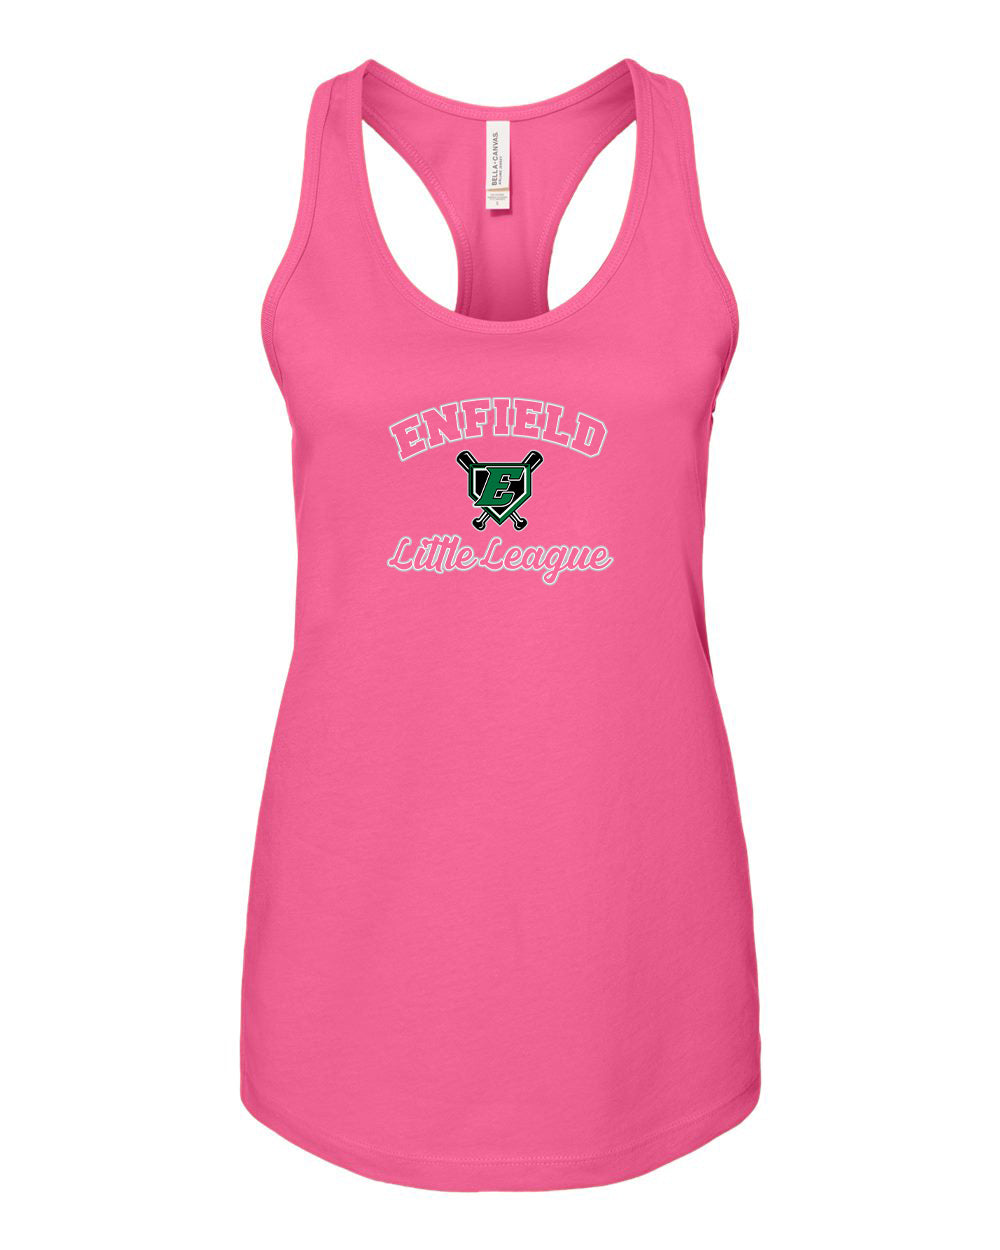 ELL Ladies Tank Top "CC" - 6008 (color options available)